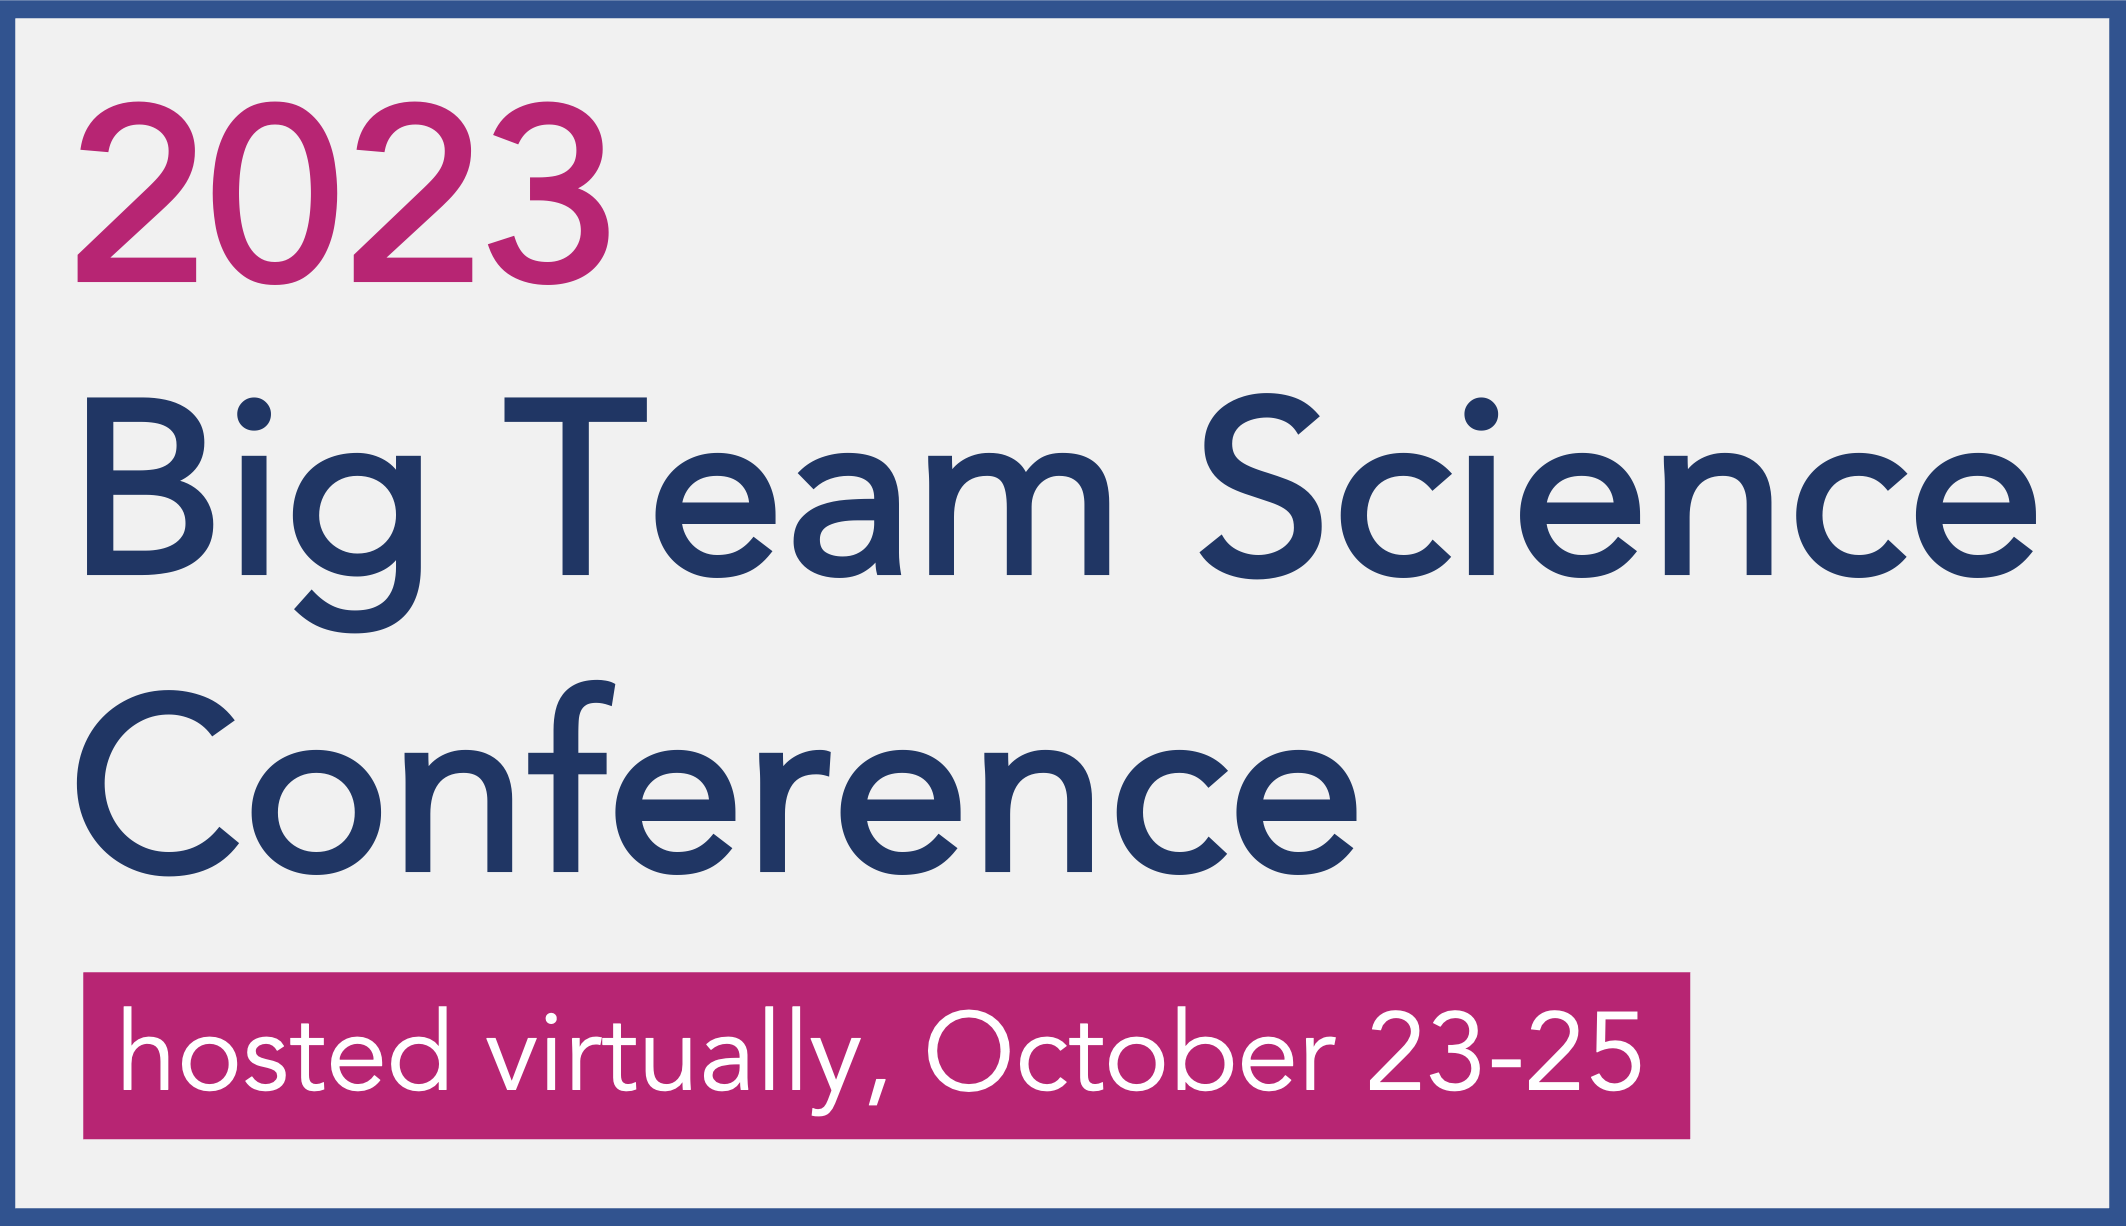 2023 Big Team Science Conference, hosted virtually October 23-25